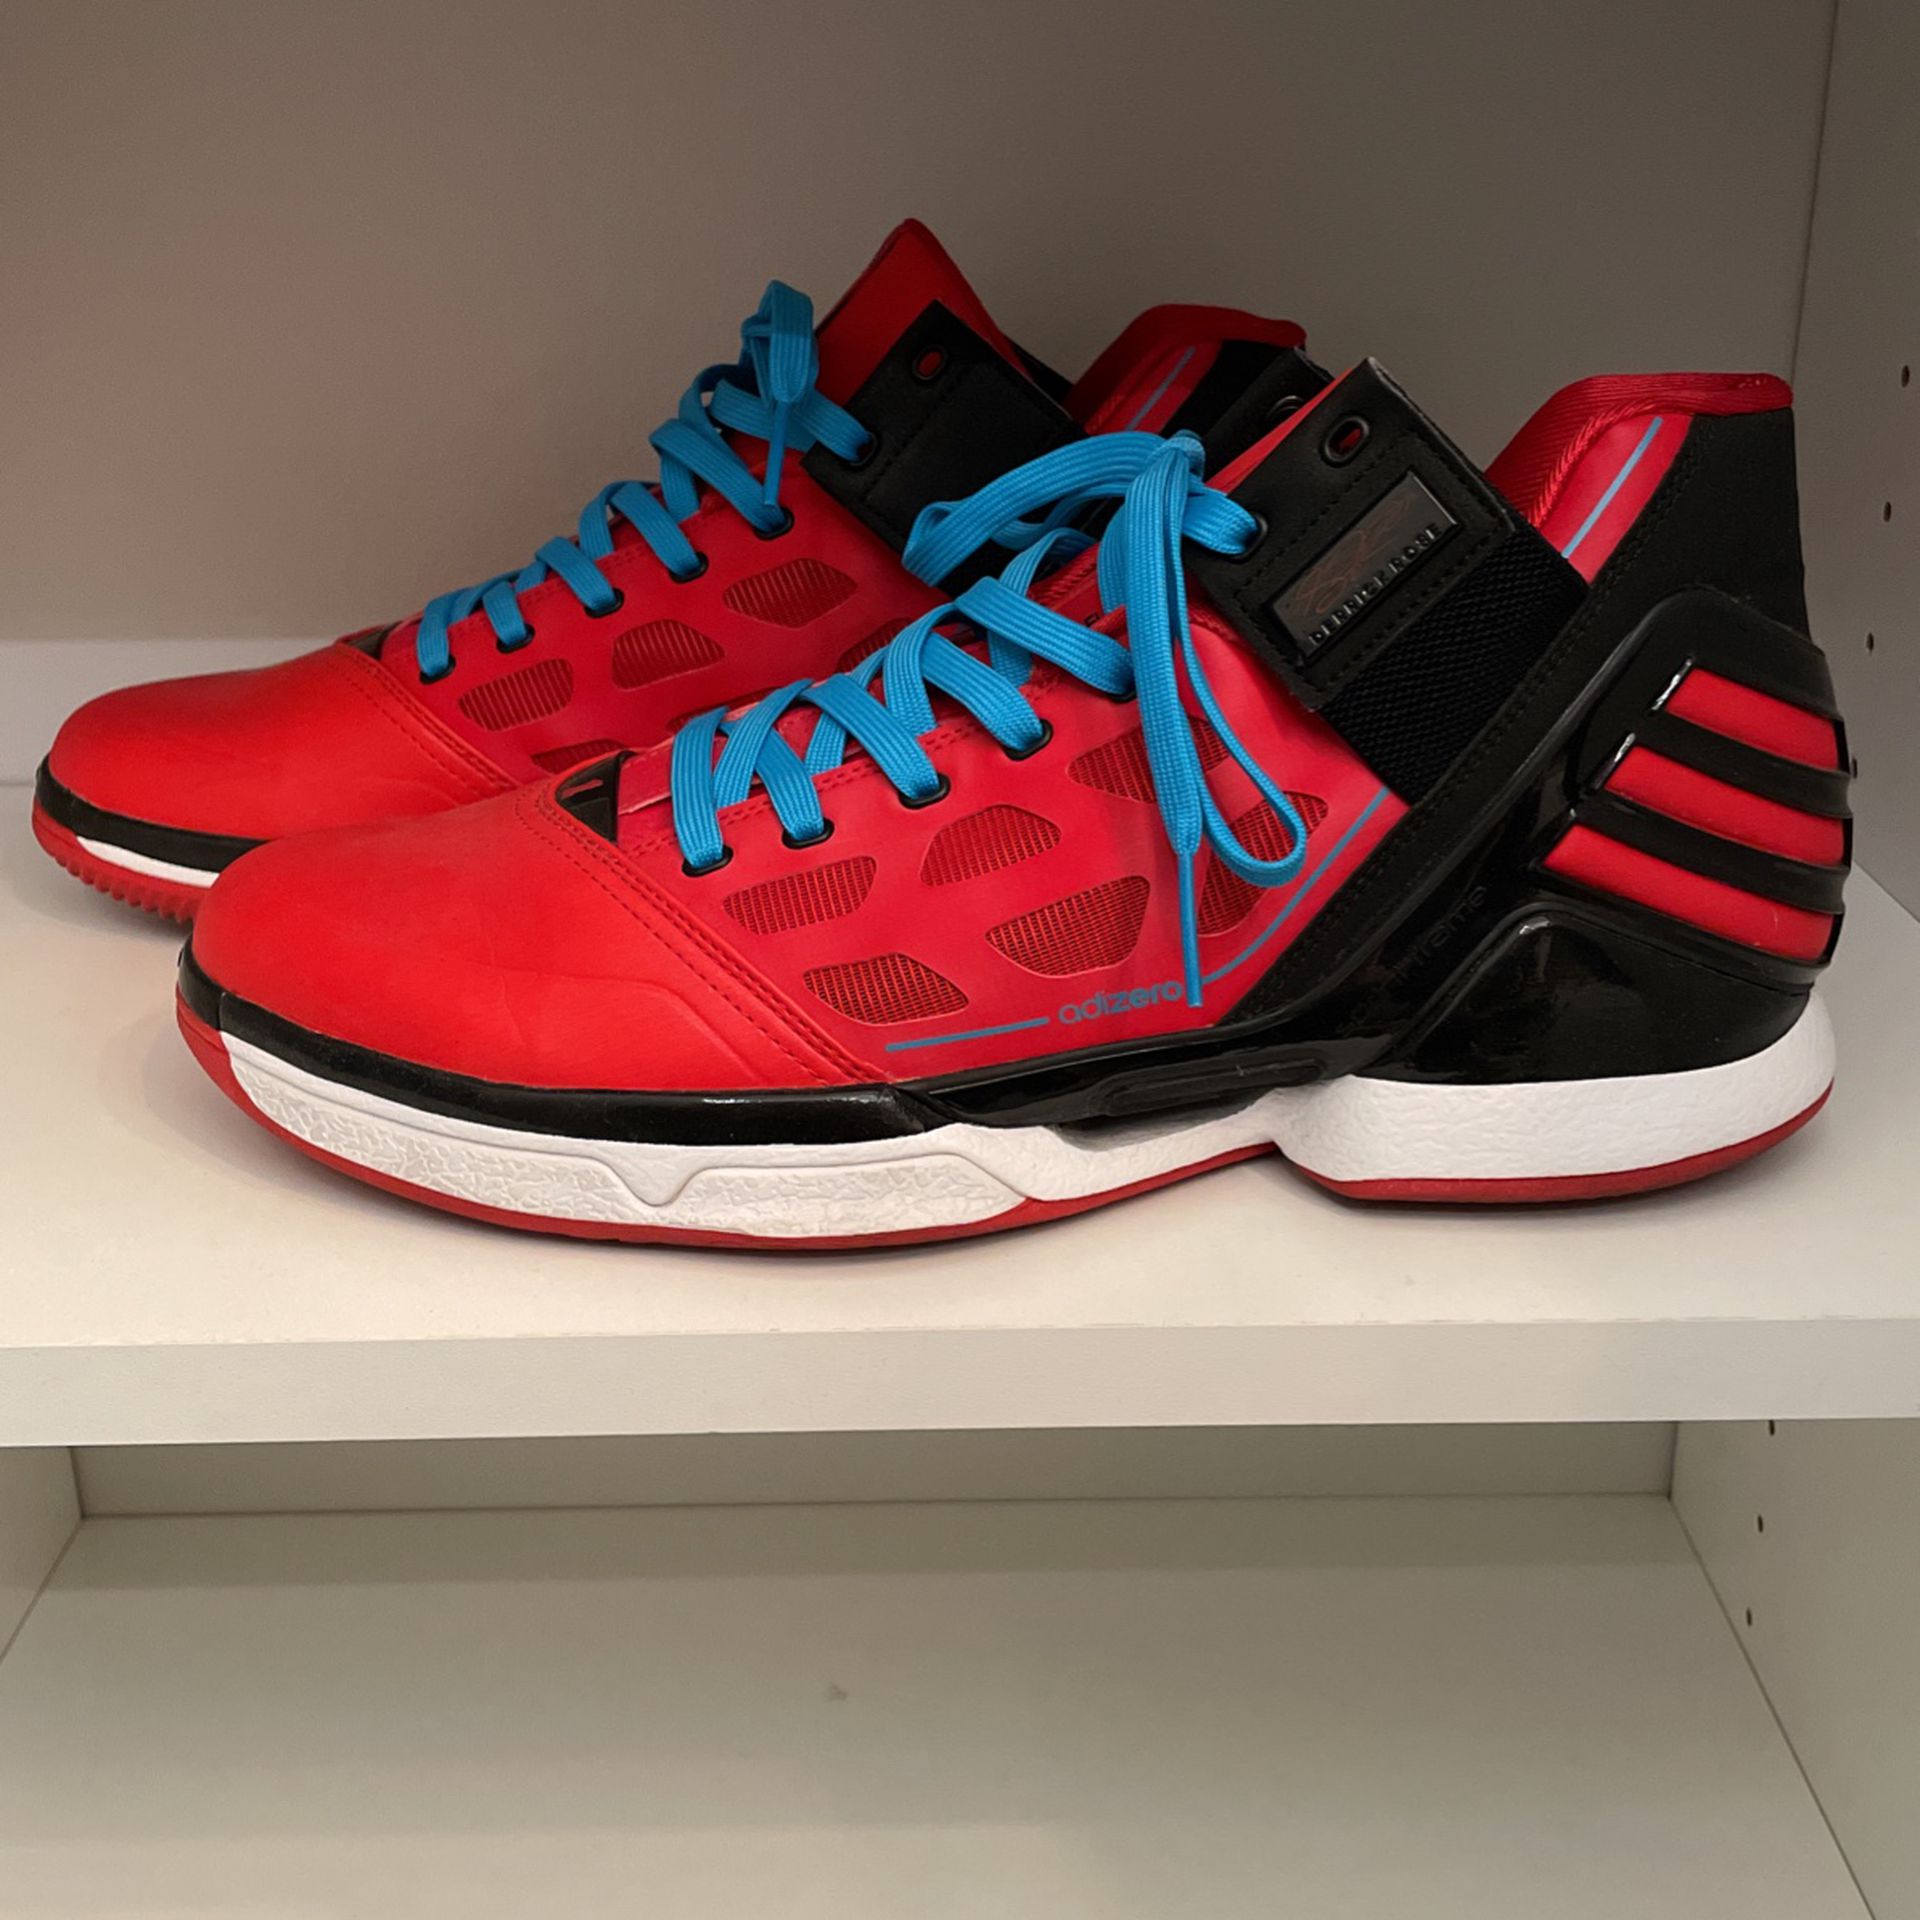 Adidas D Rose 2 City L-Train Size for Sale in Chicago, IL - OfferUp